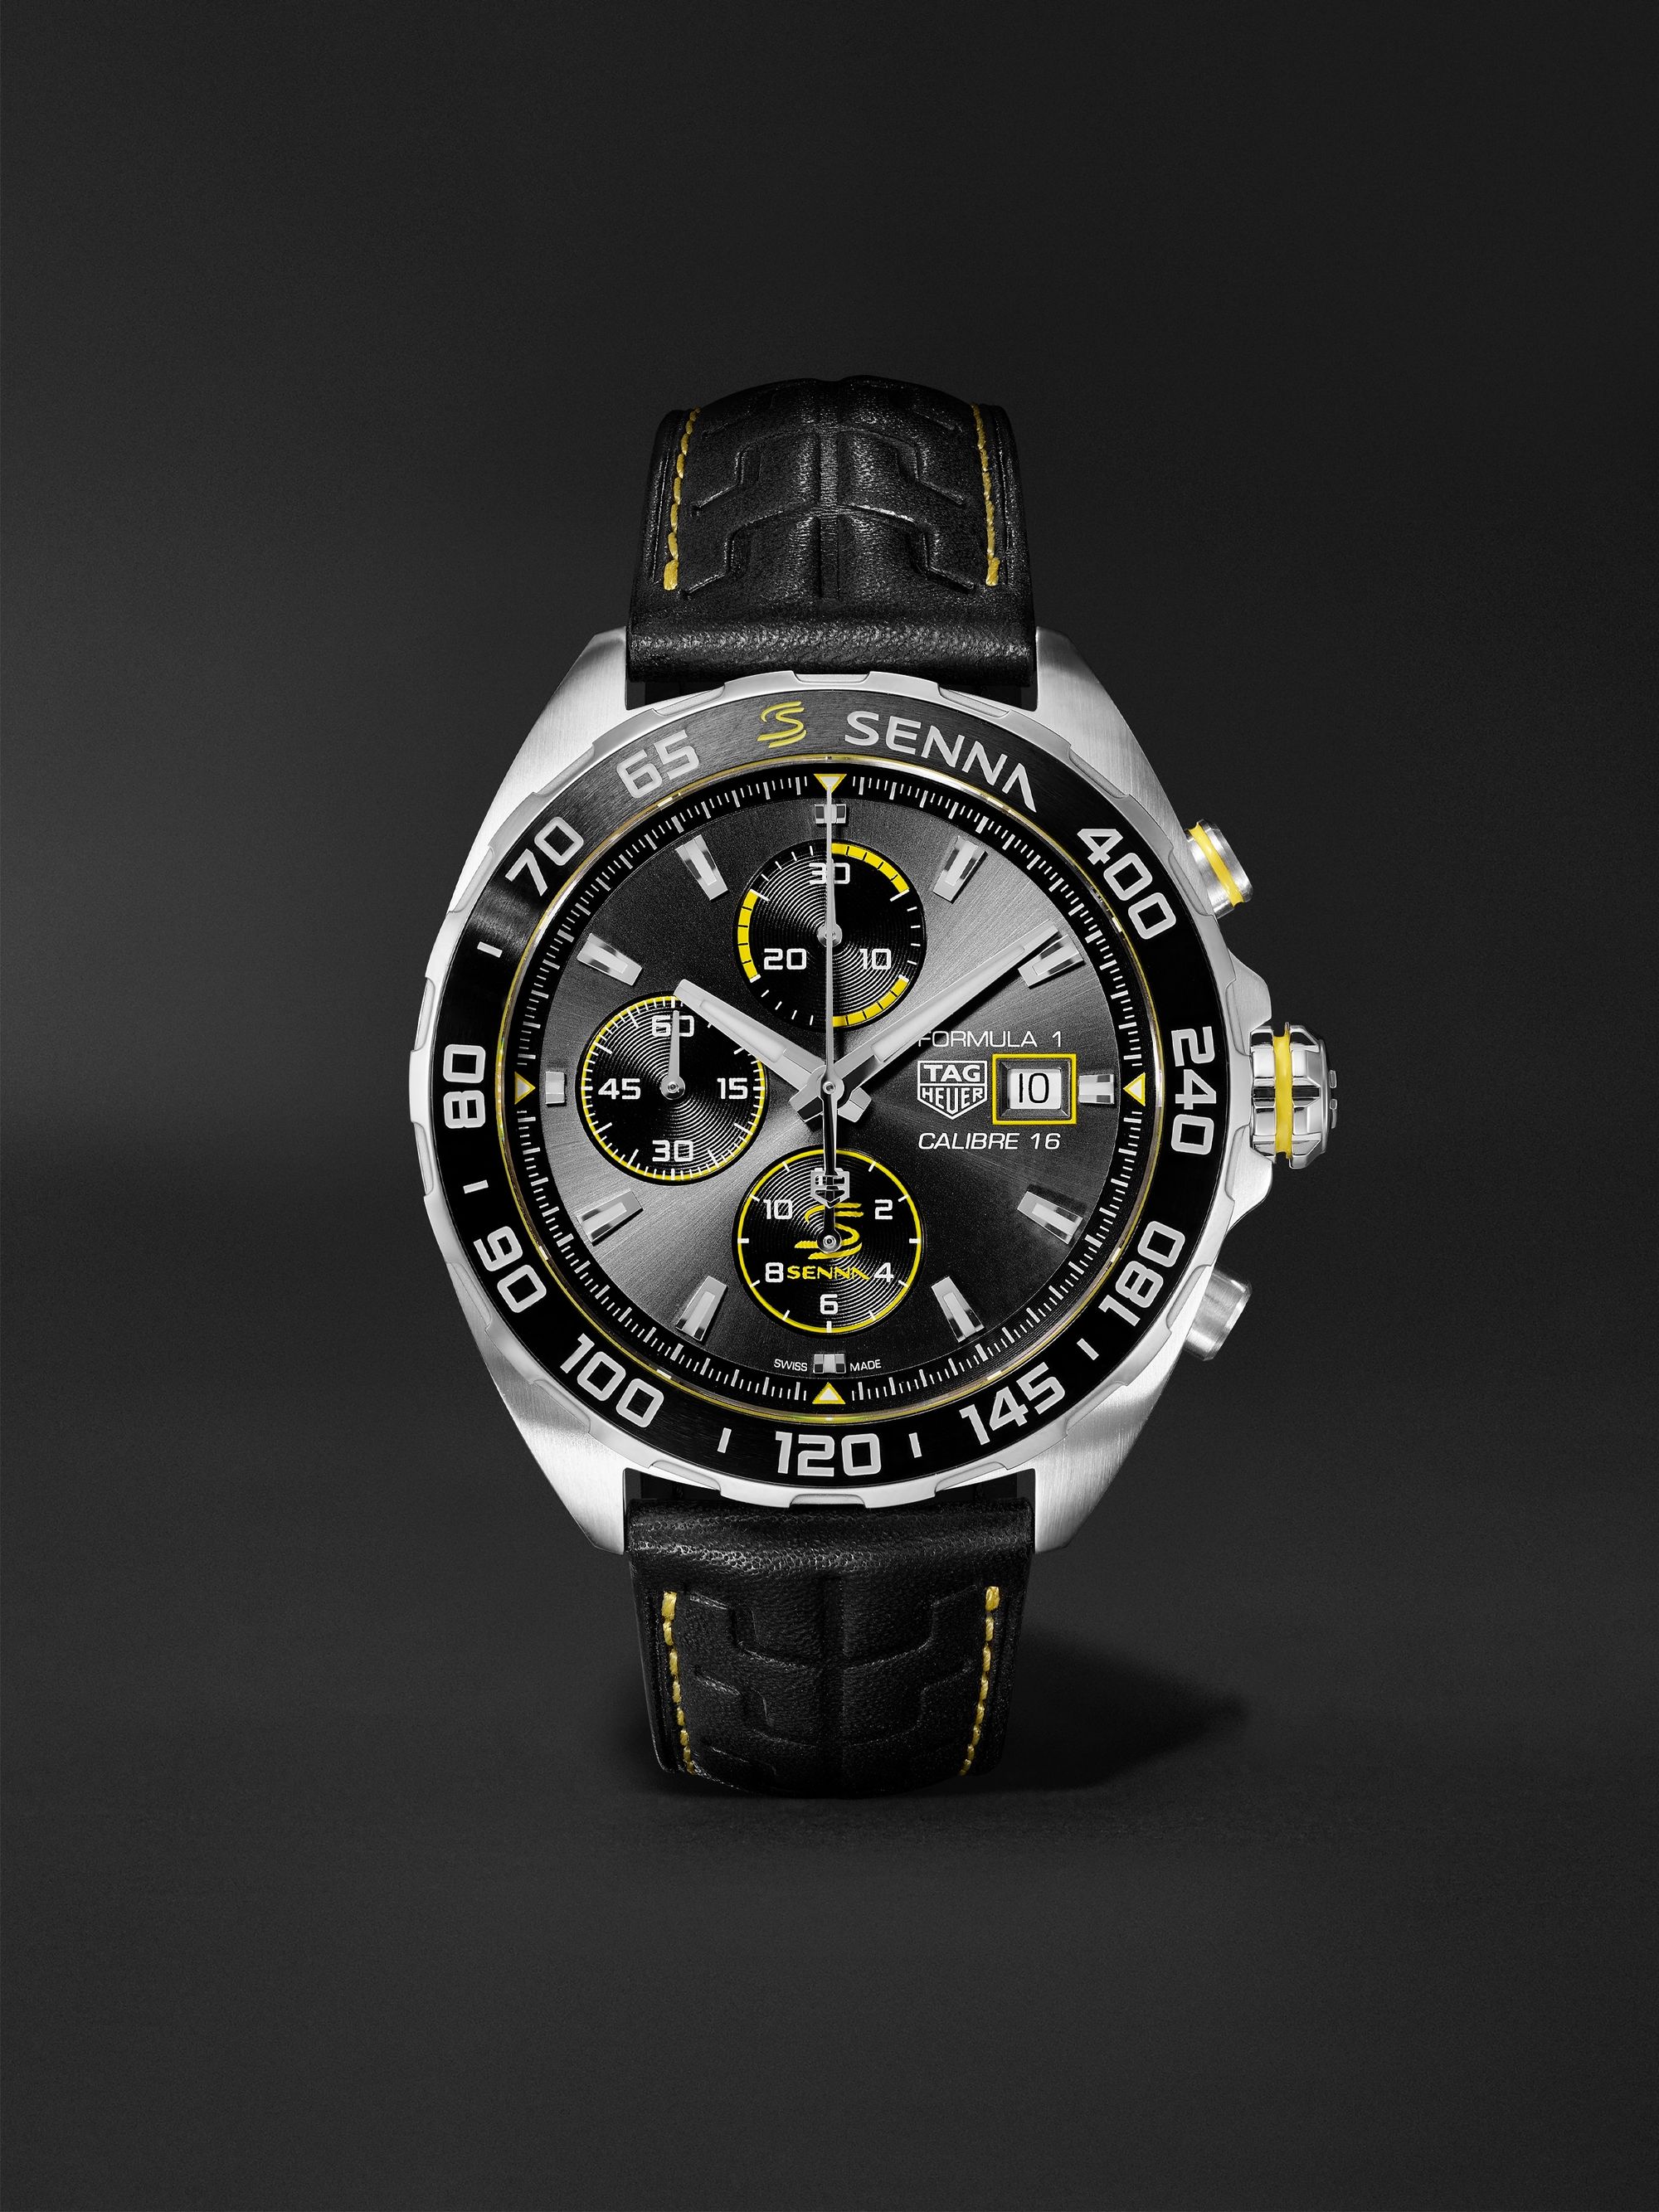 TAG Heuer Formula 1 x Senna Chronograph 44mm Stainless Steel and Leather Watch, Ref. No. CAZ201B.FC6487